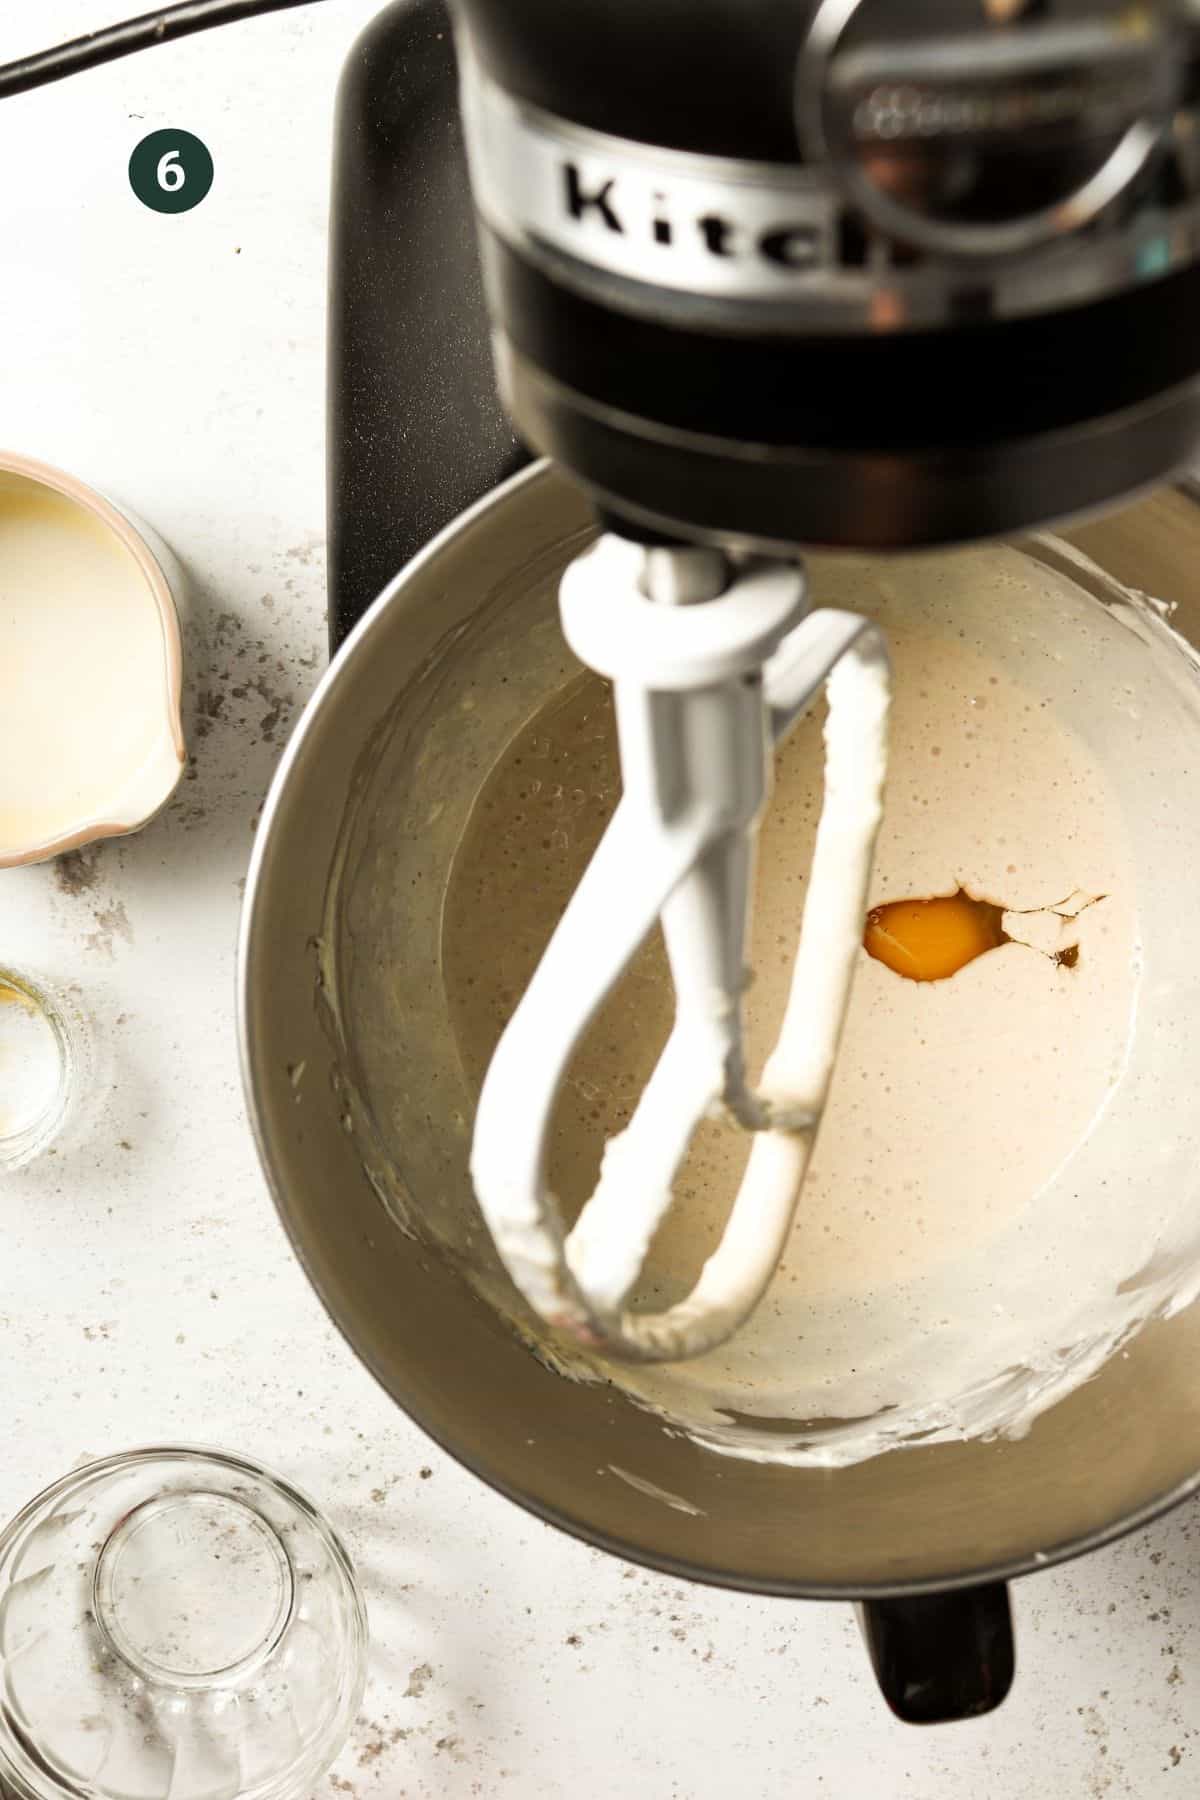 Egg added to the mixer to mix into the mixture. 